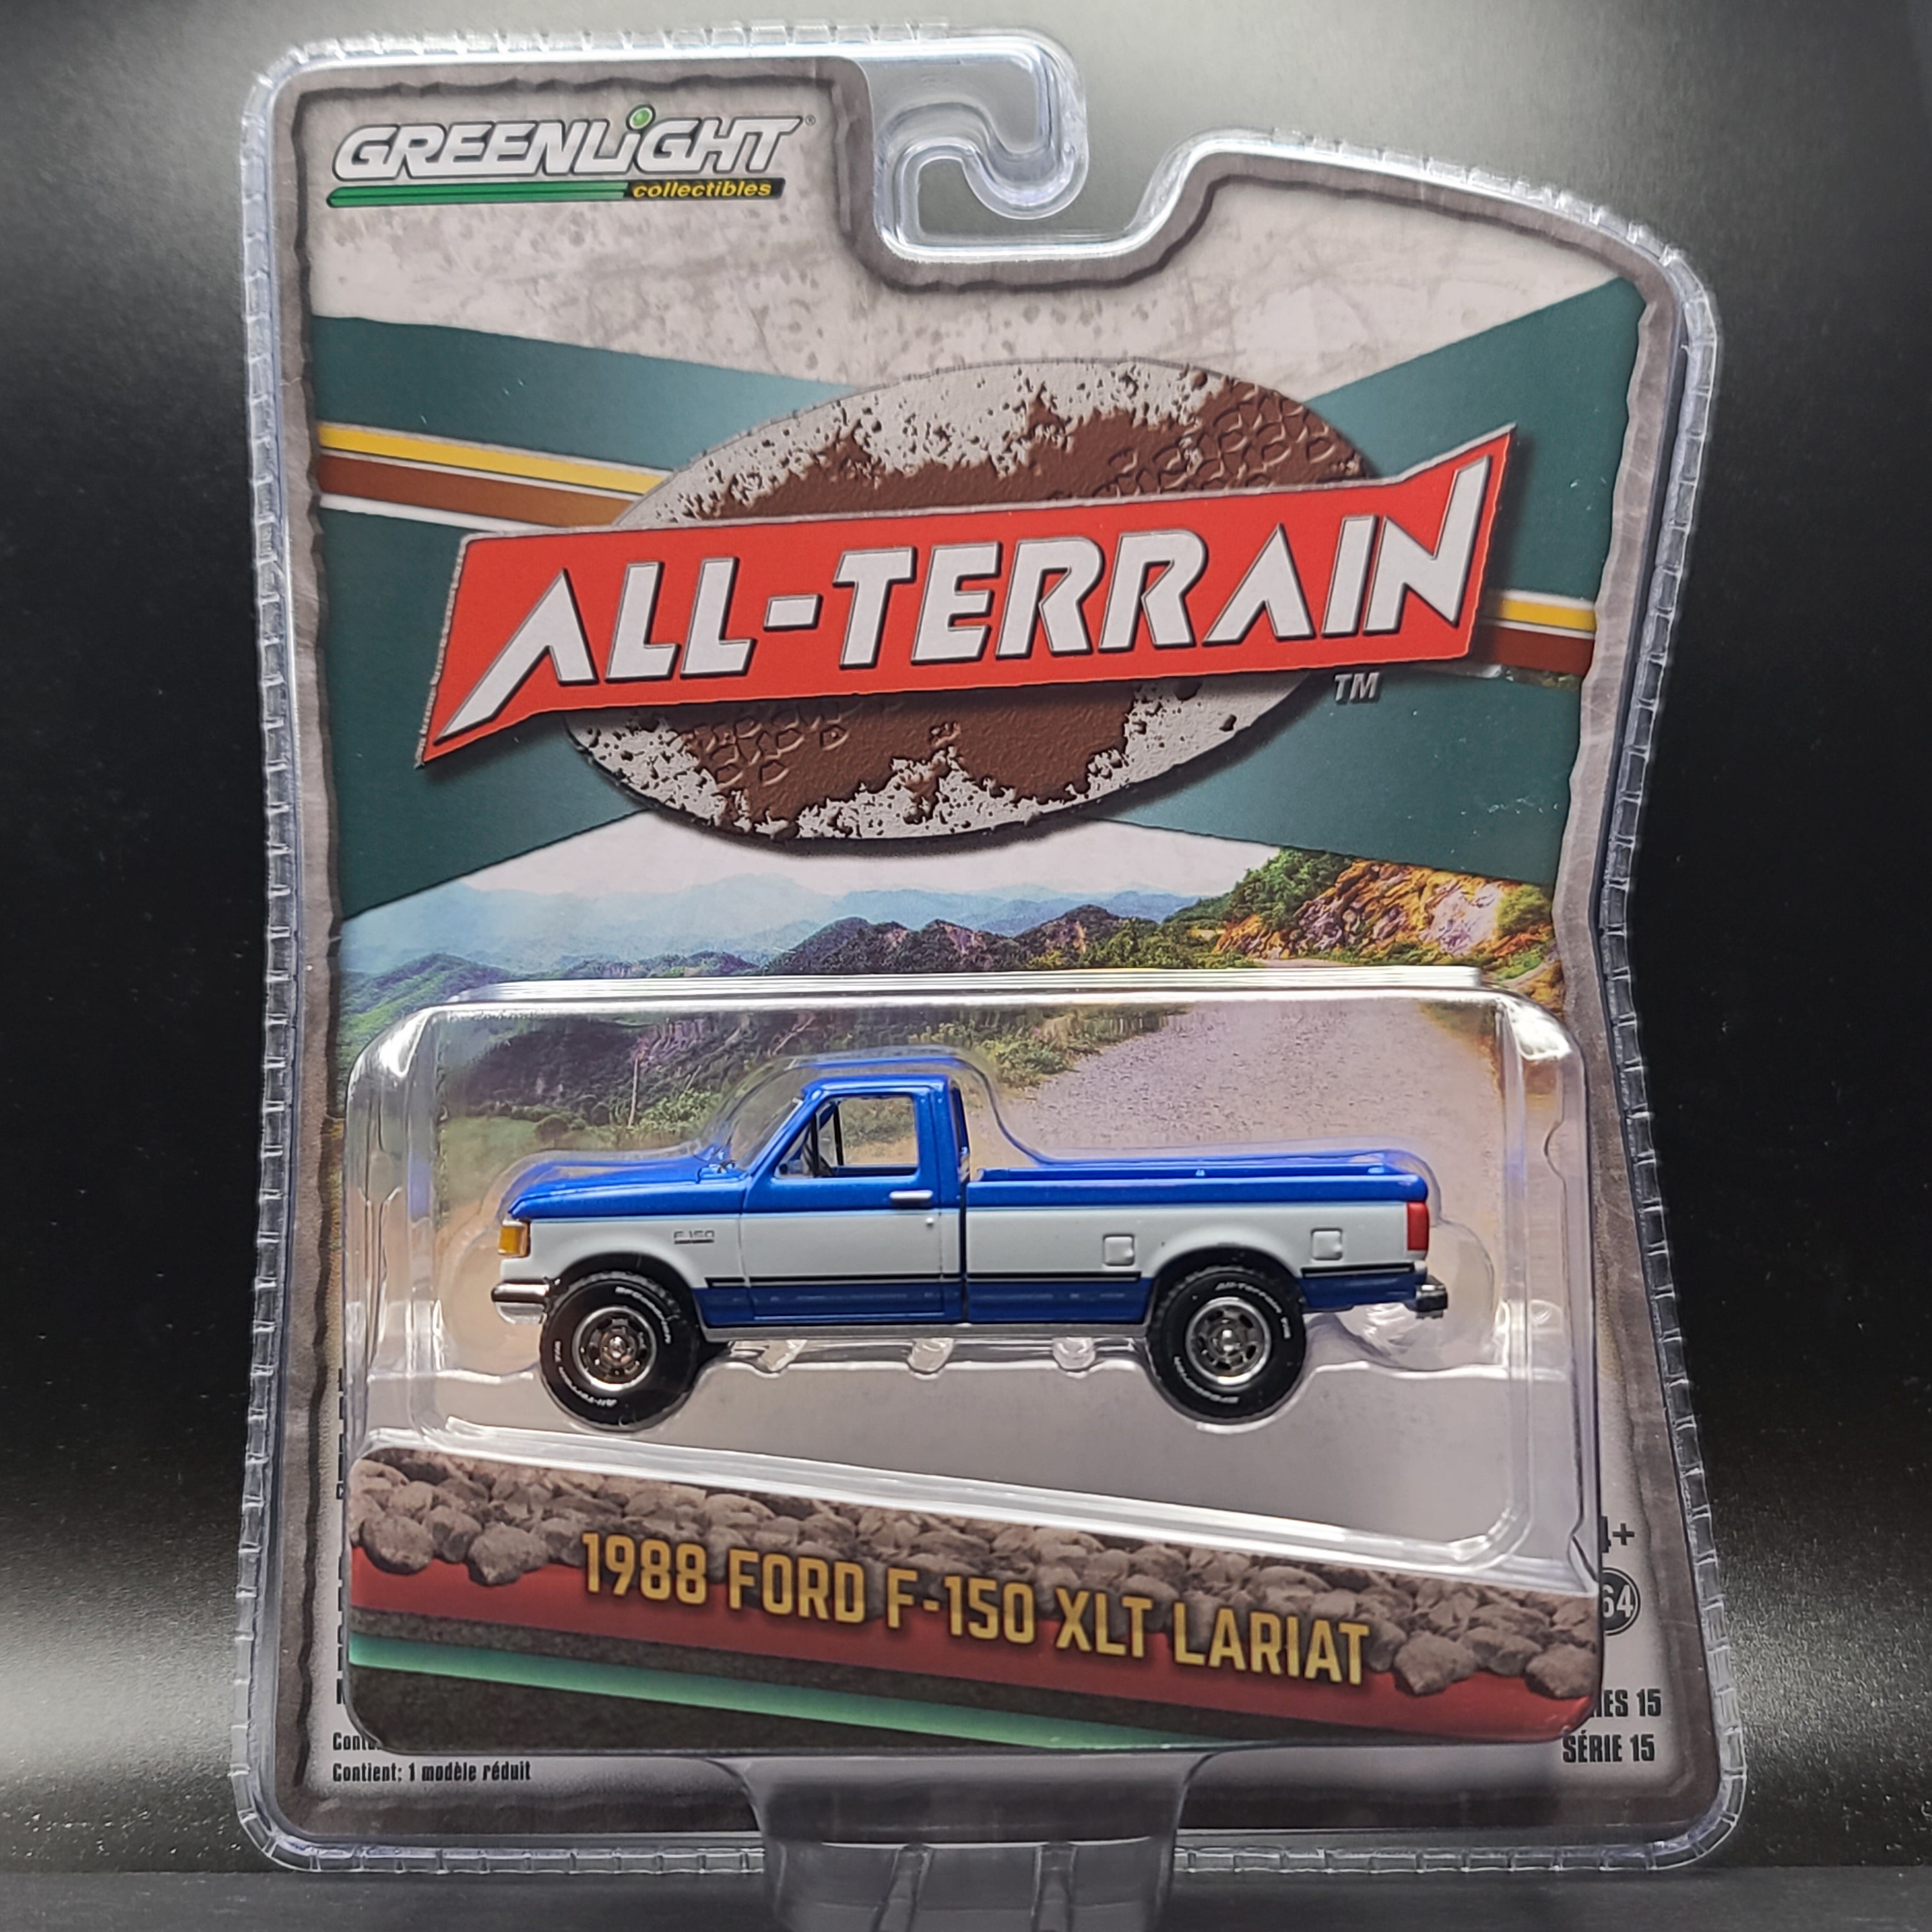 Greenlight 1988 Ford F-150 XLT Lariat Pick-up Truck - 1:64 scale (2023 All Terrain)